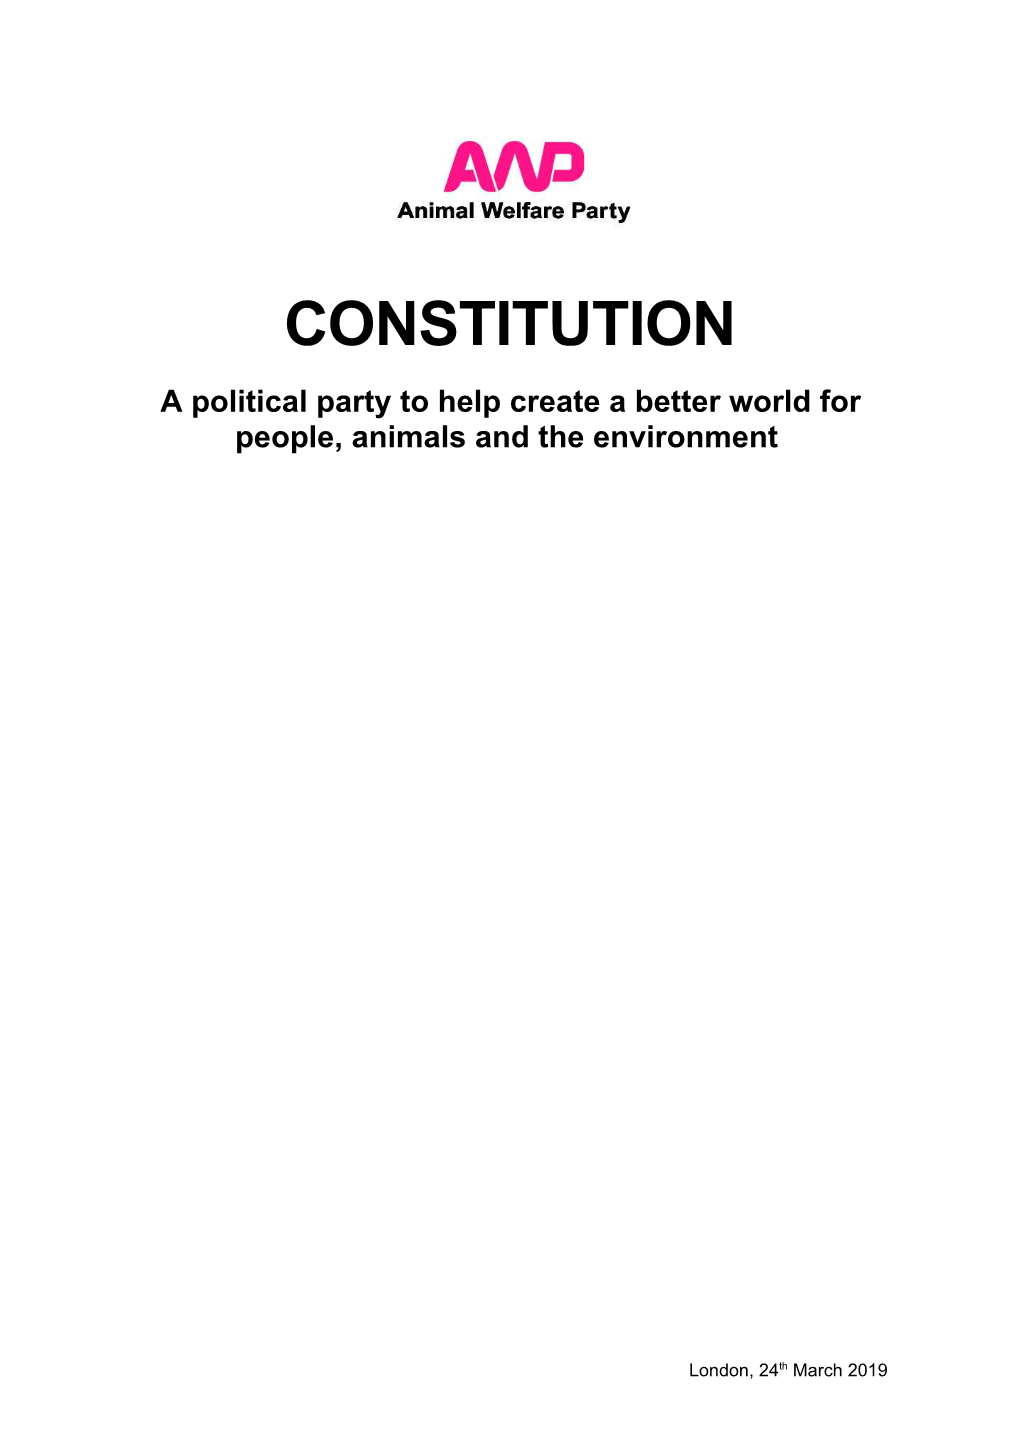 CONSTITUTION a Political Party to Help Create a Better World for People, Animals and the Environment